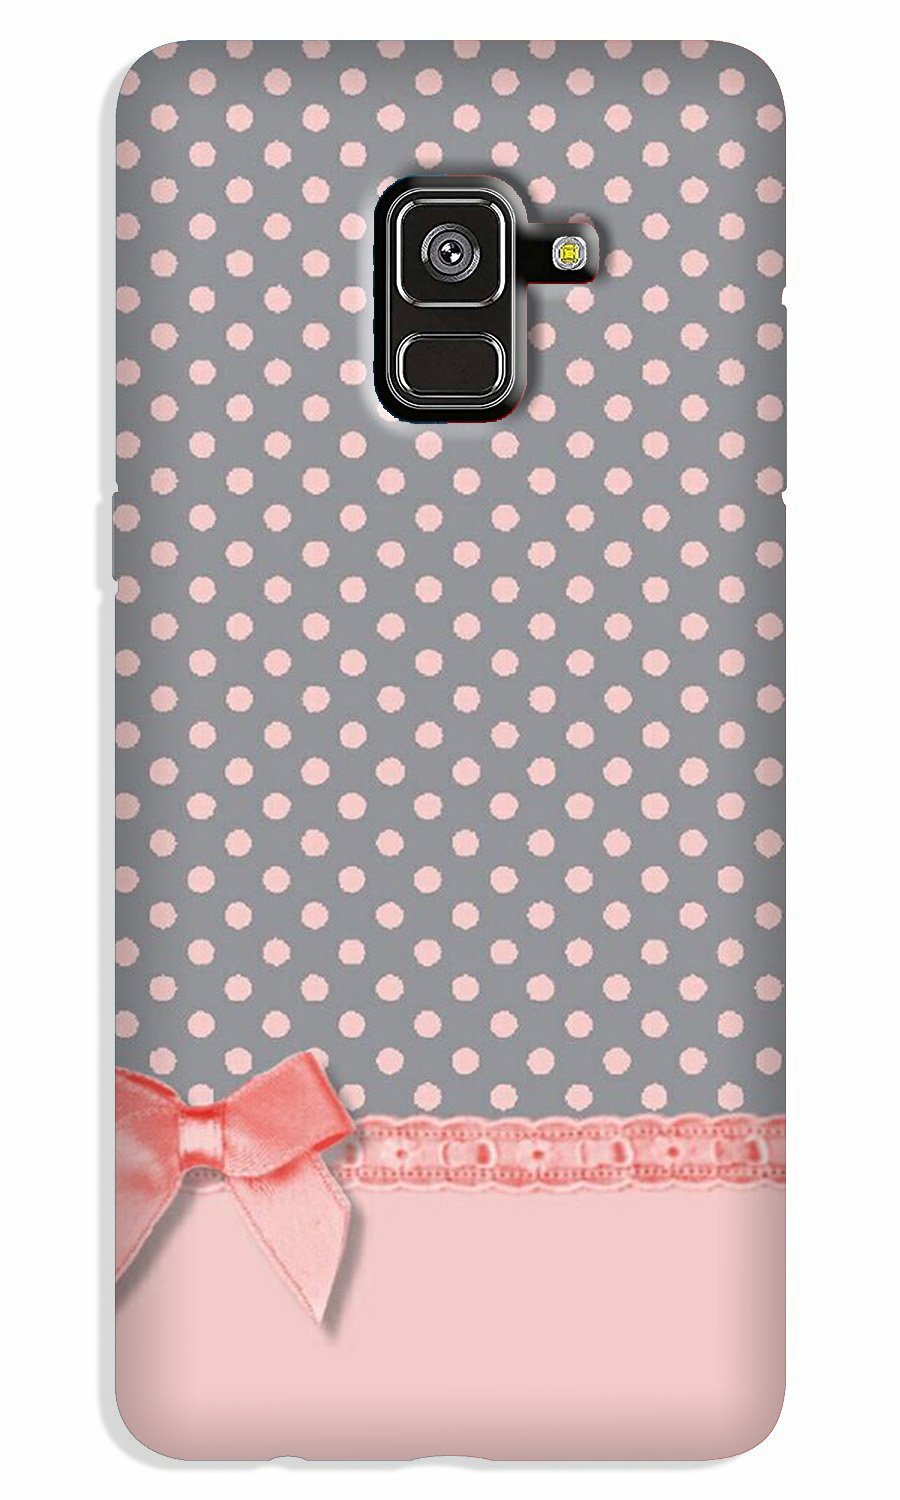 Gift Wrap2 Case for Galaxy J6 / On6